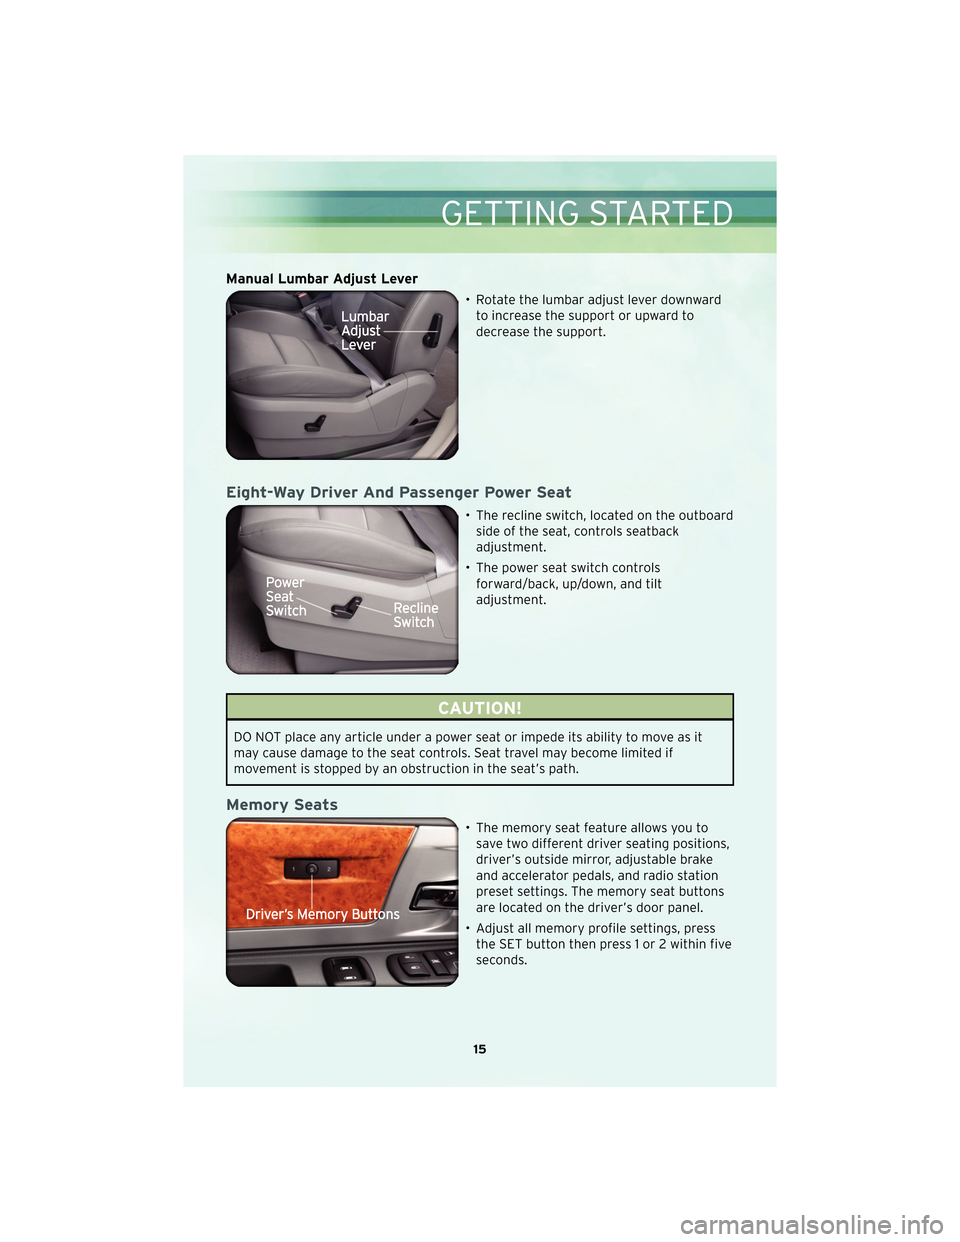 CHRYSLER TOWN AND COUNTRY 2010 5.G User Guide Manual Lumbar Adjust Lever
• Rotate the lumbar adjust lever downwardto increase the support or upward to
decrease the support.
Eight-Way Driver And Passenger Power Seat
• The recline switch, locat